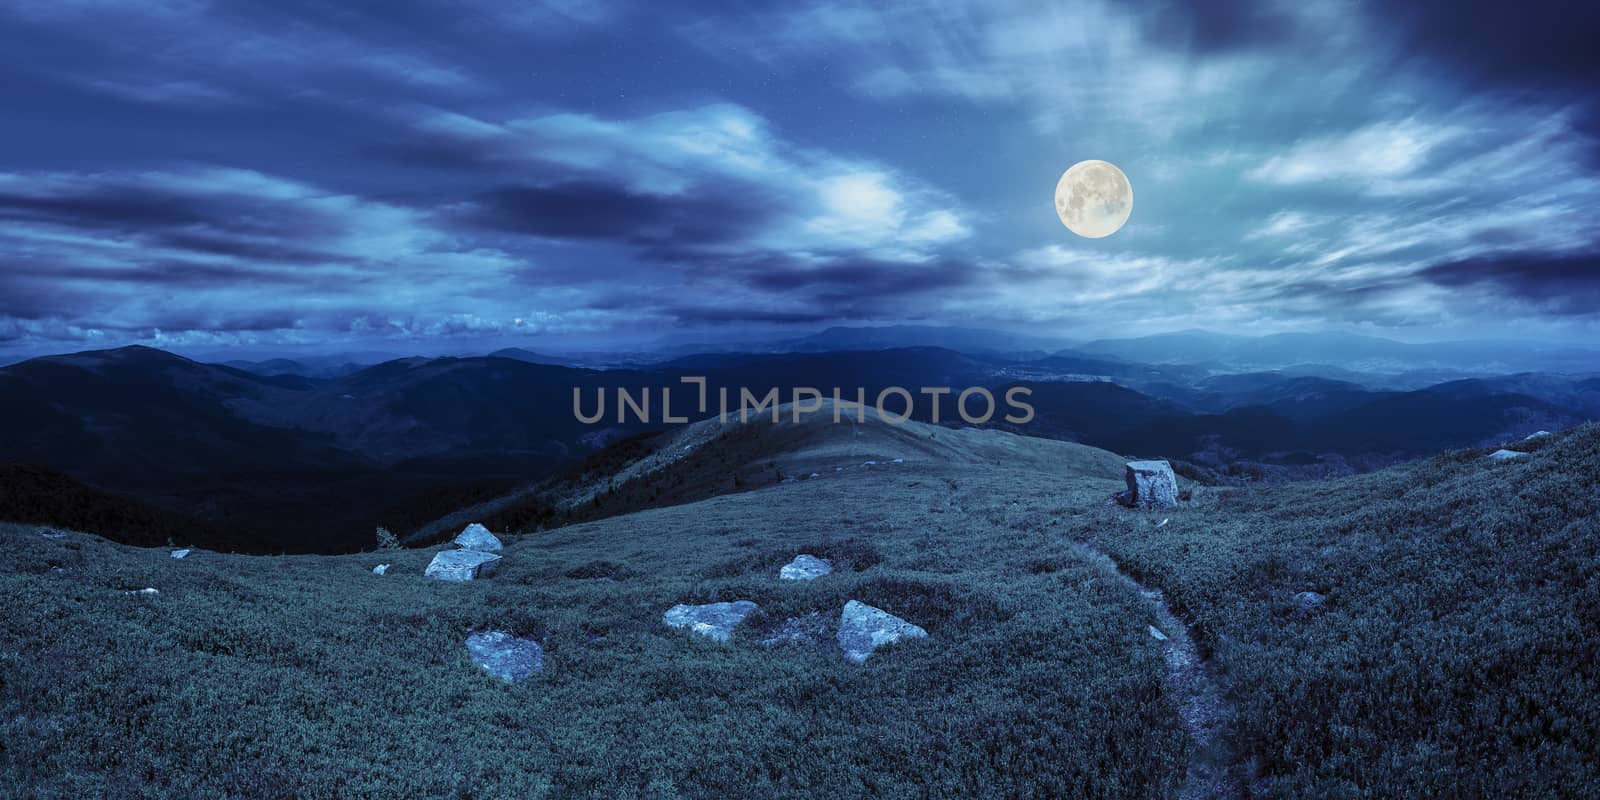 composite landscape with narrow meadow path in grass among white stones on top of mountain range at night in full moon light with blured sky